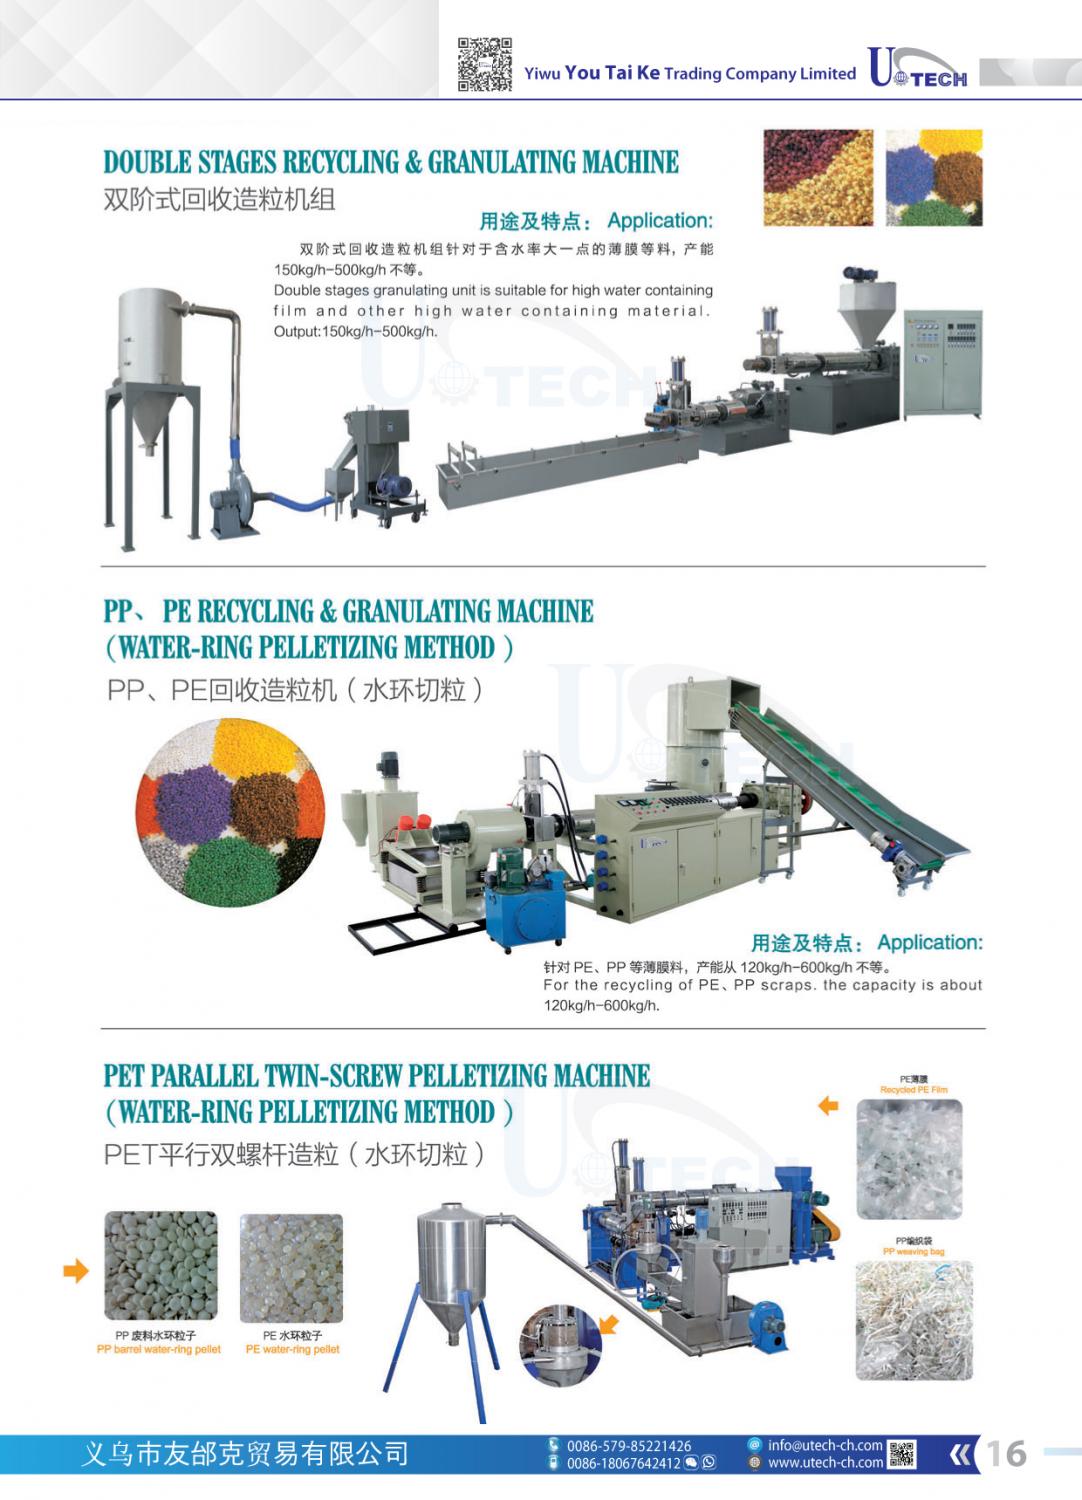 DUUBLE STAGES RECYCLING & GRANUIATING MACHINE